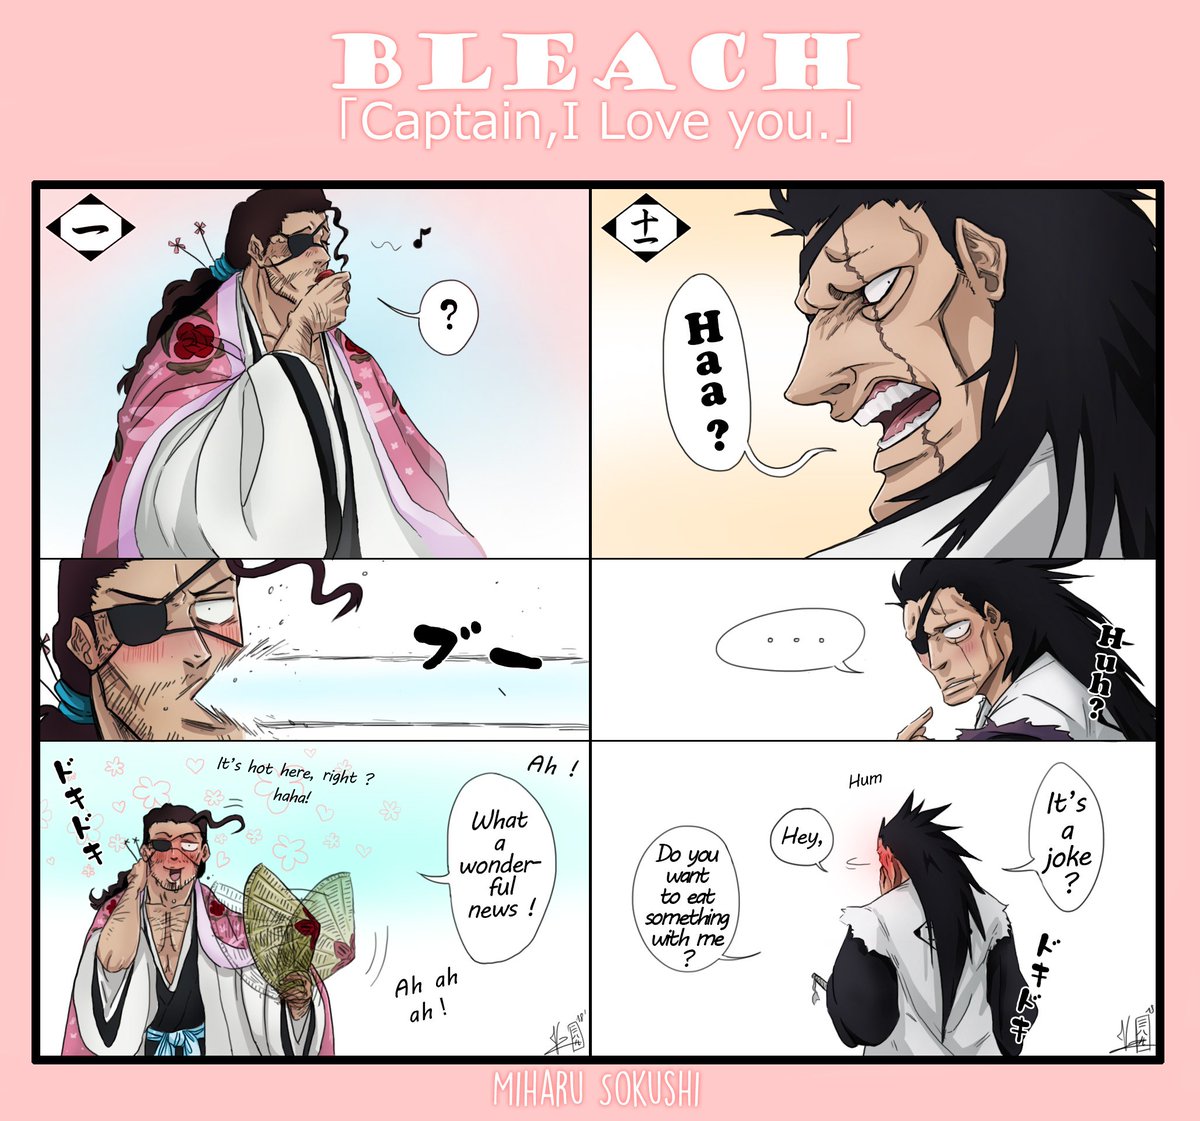 Miharu Sokushi Bleach ブリーチ 京楽 更木 剣八 Love 愛 Kenpachi Kyoraku I Draw Them Last Year What If We Declared Our Love To Our Favorite Captain In Bleach Here The